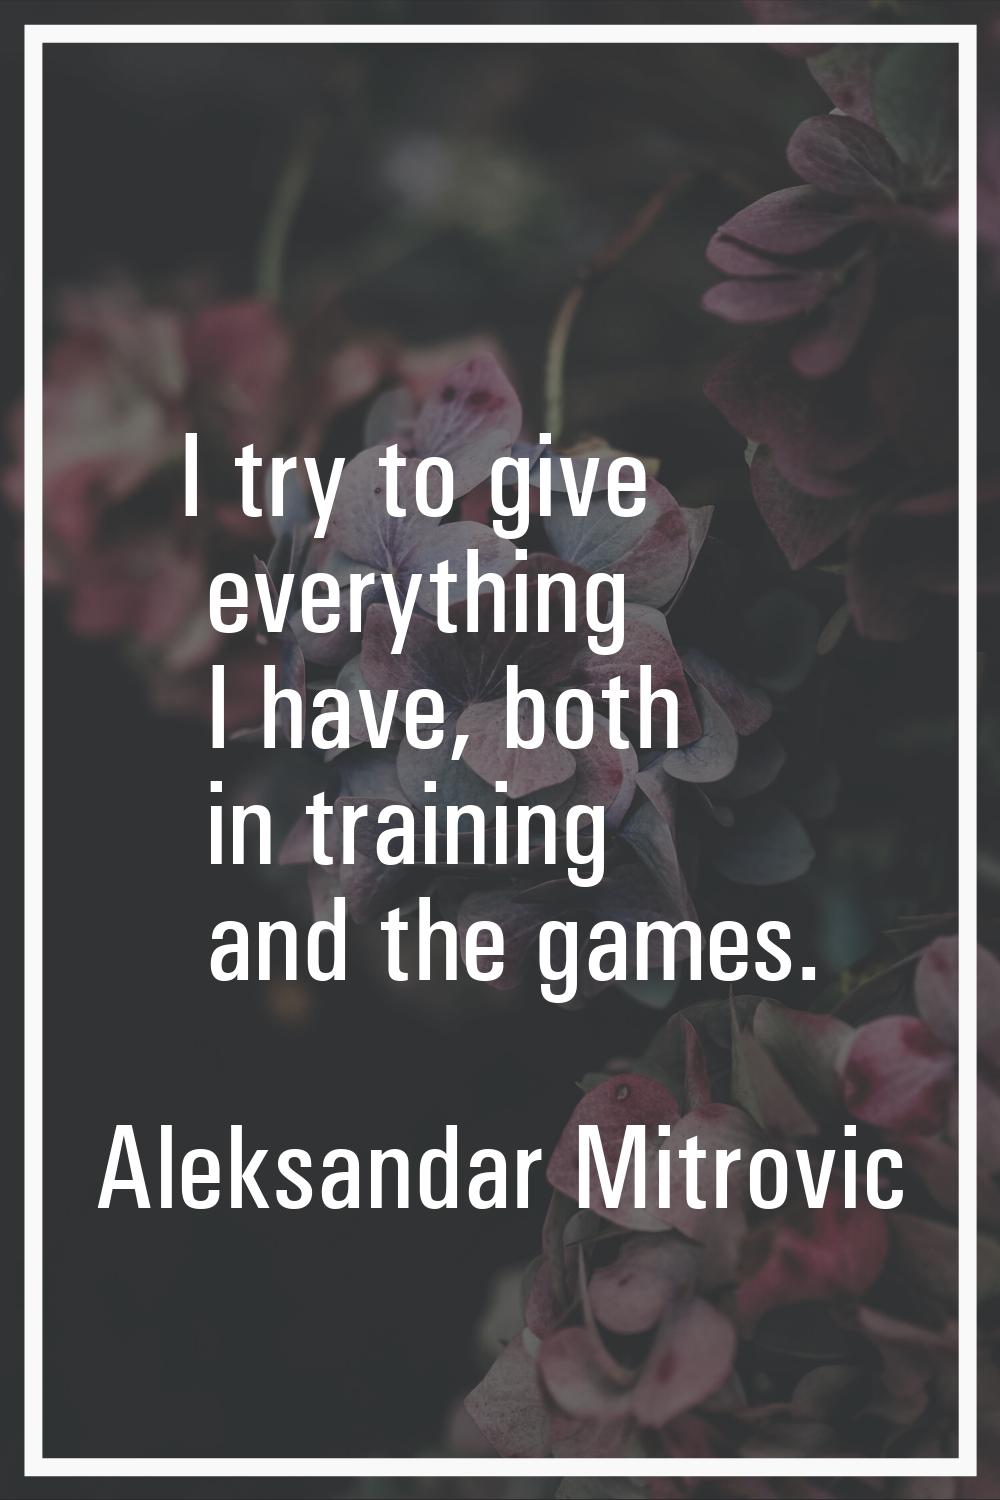 I try to give everything I have, both in training and the games.